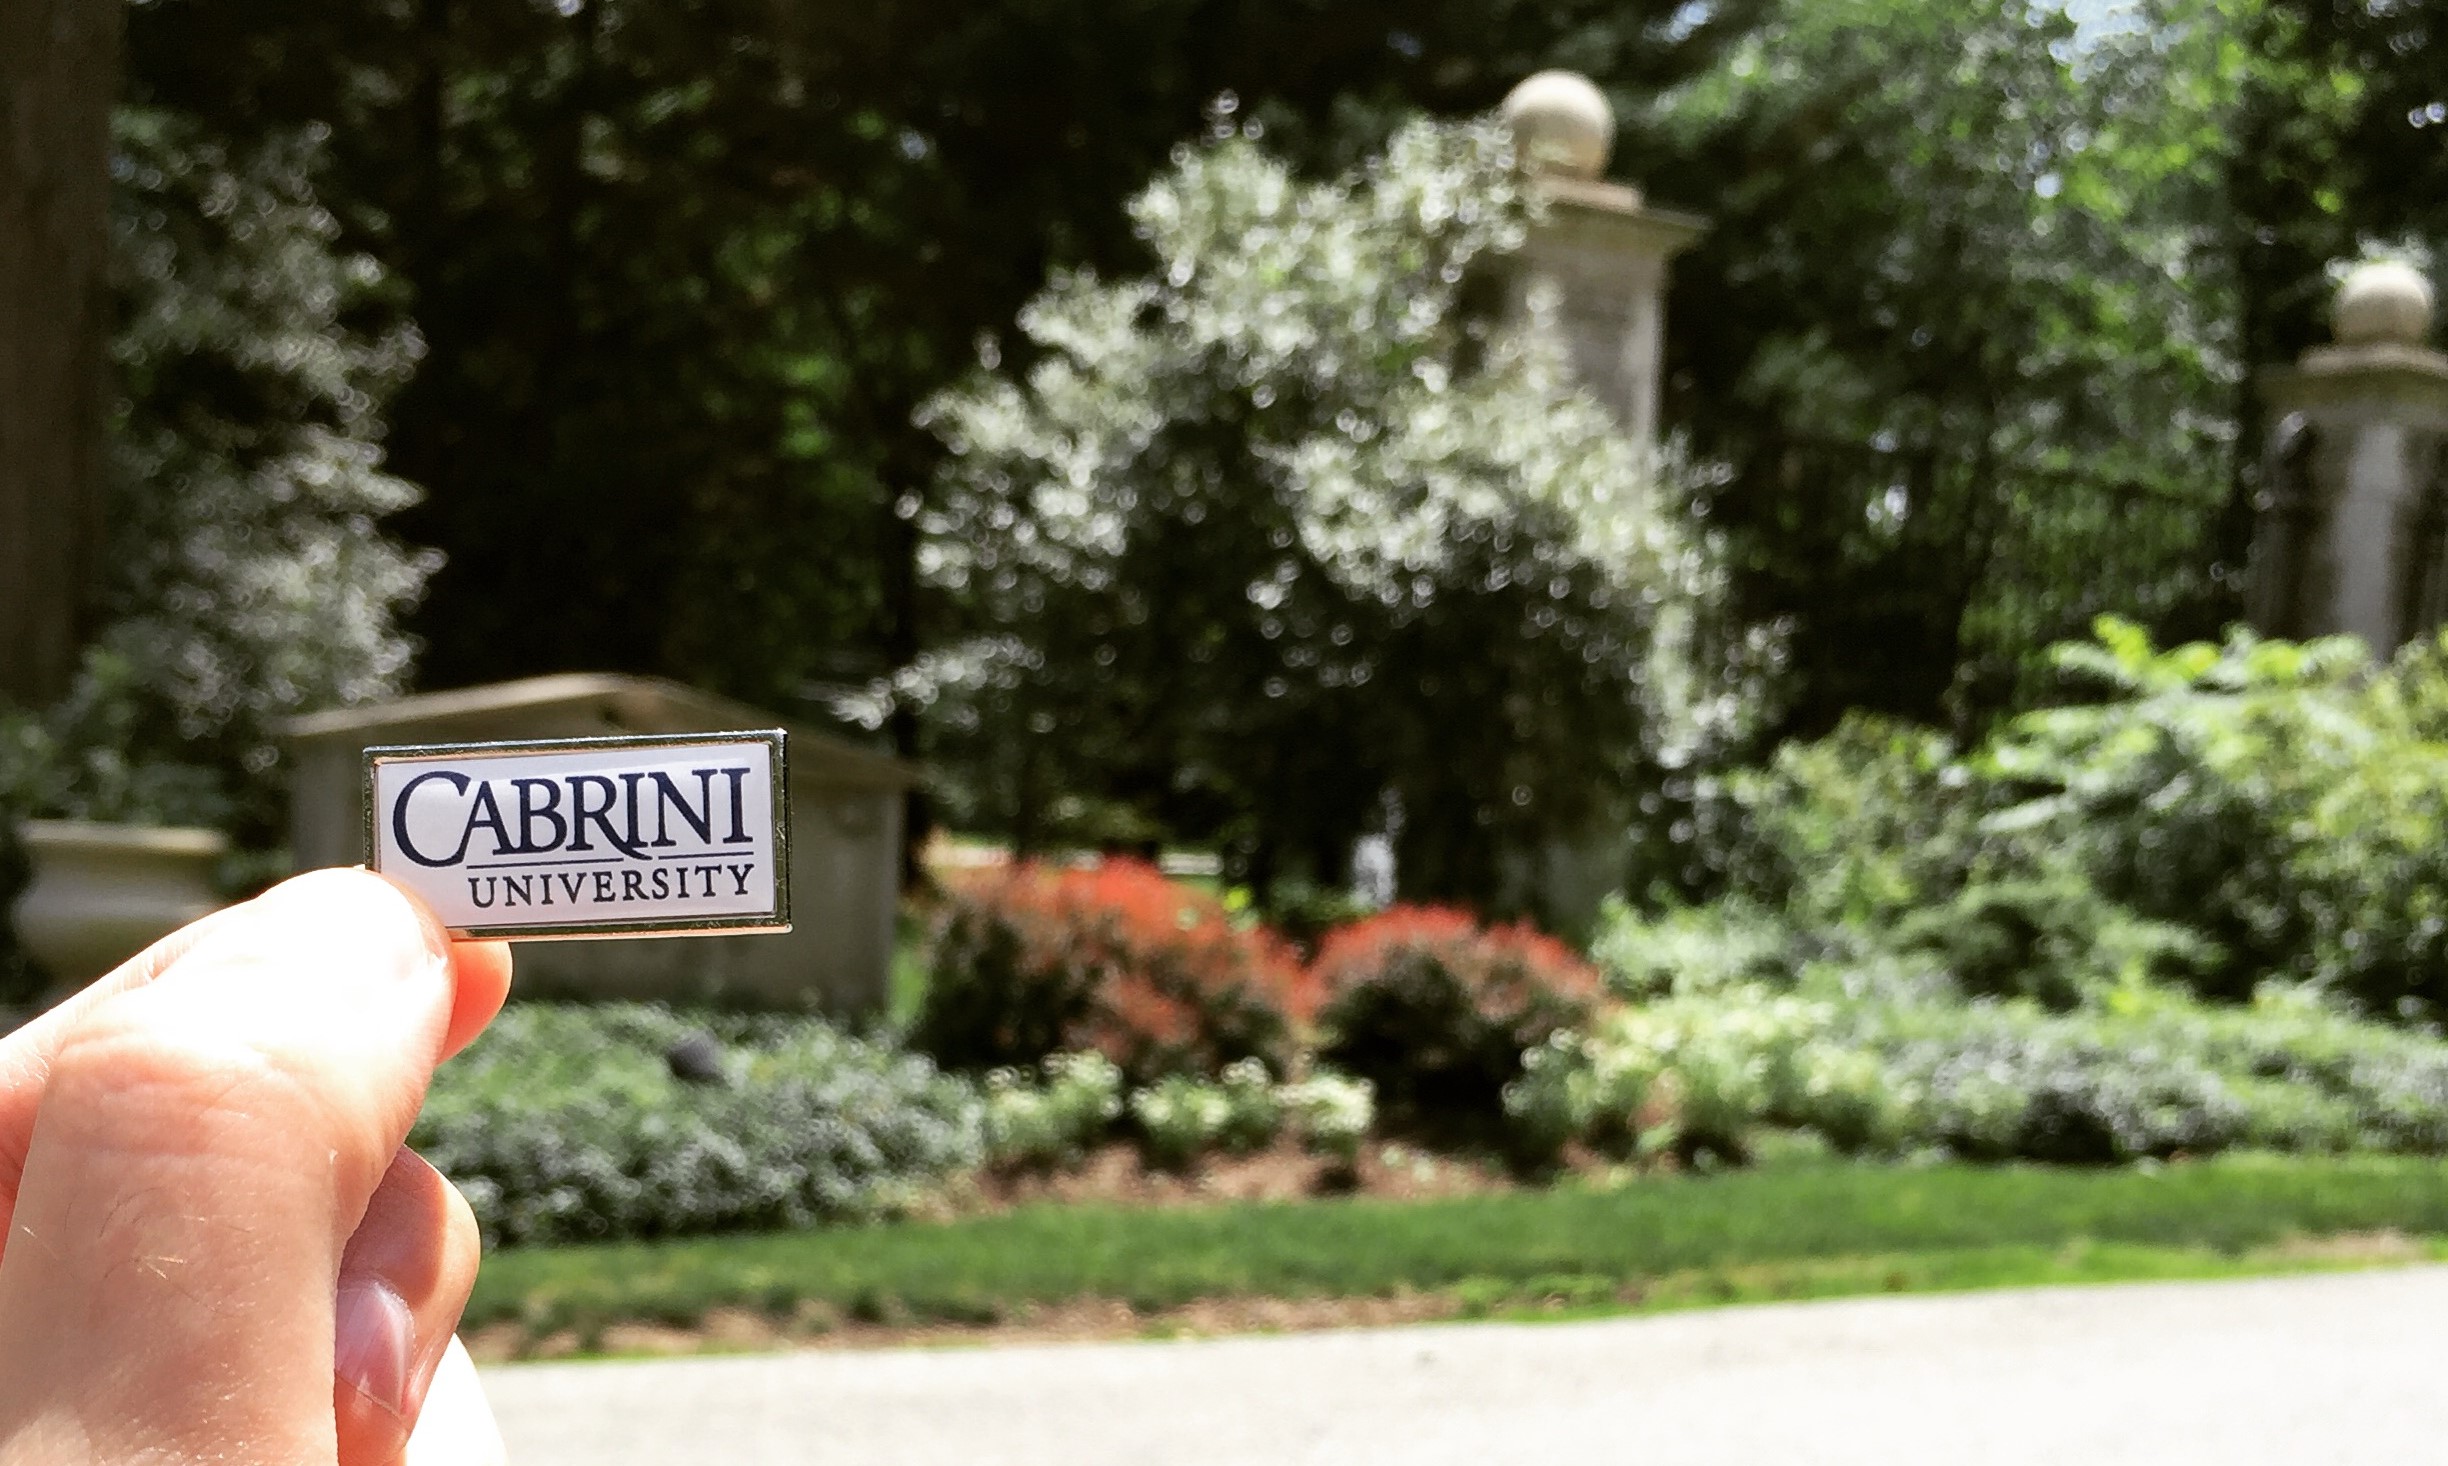 A hand holding a Cabrini University pin over the Cabrini College sign